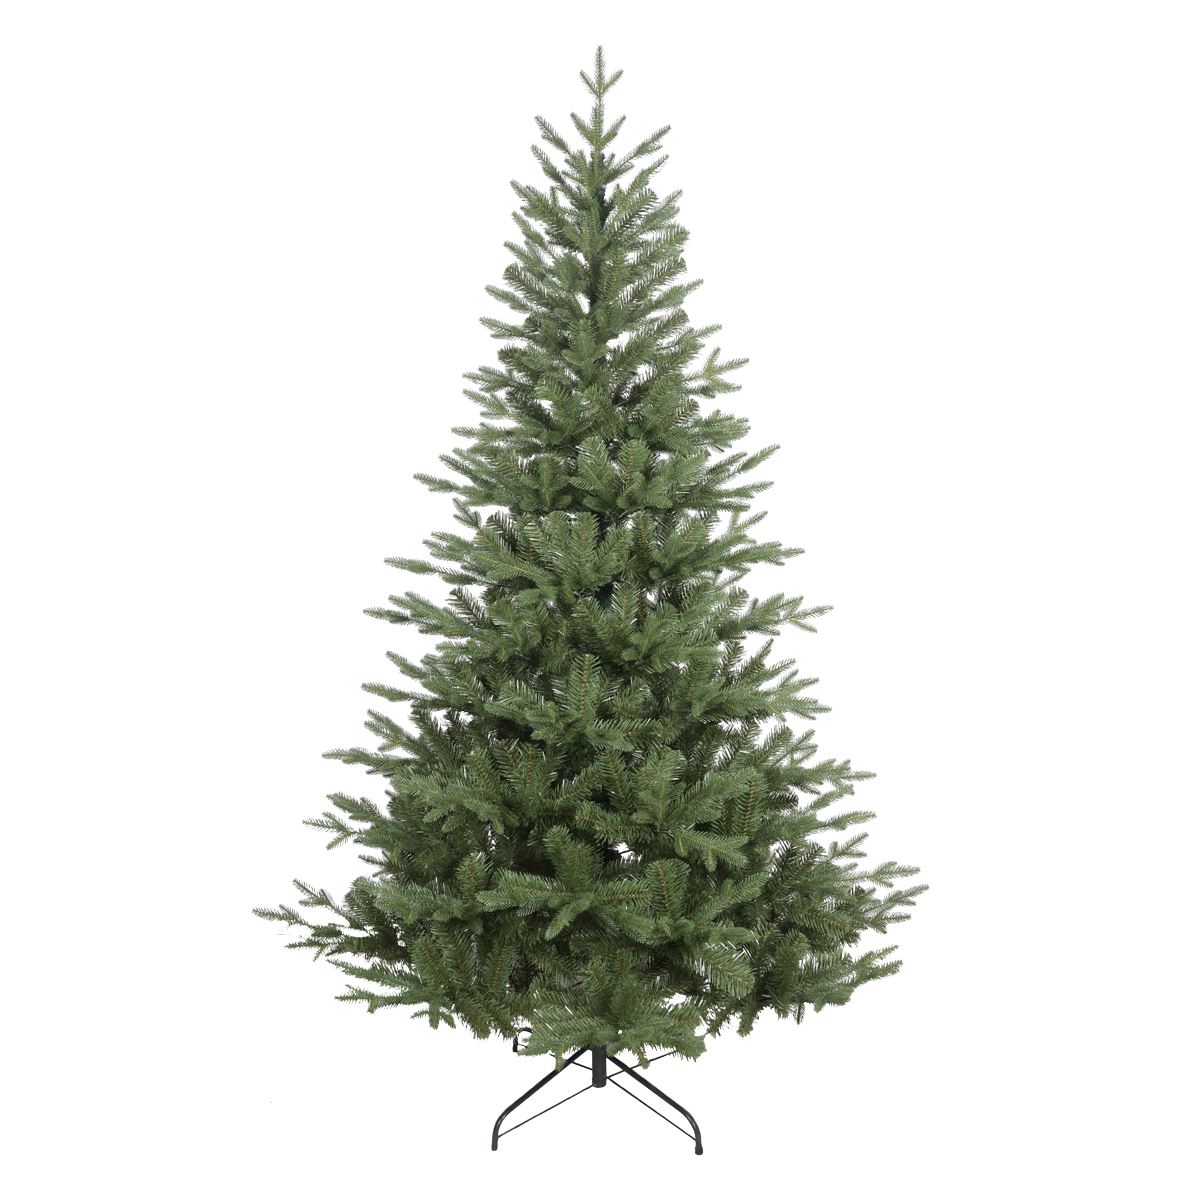 Dellonda Artificial 5ft/150cm Hinged Christmas Tree with 772 PE/PVC Mix Tips